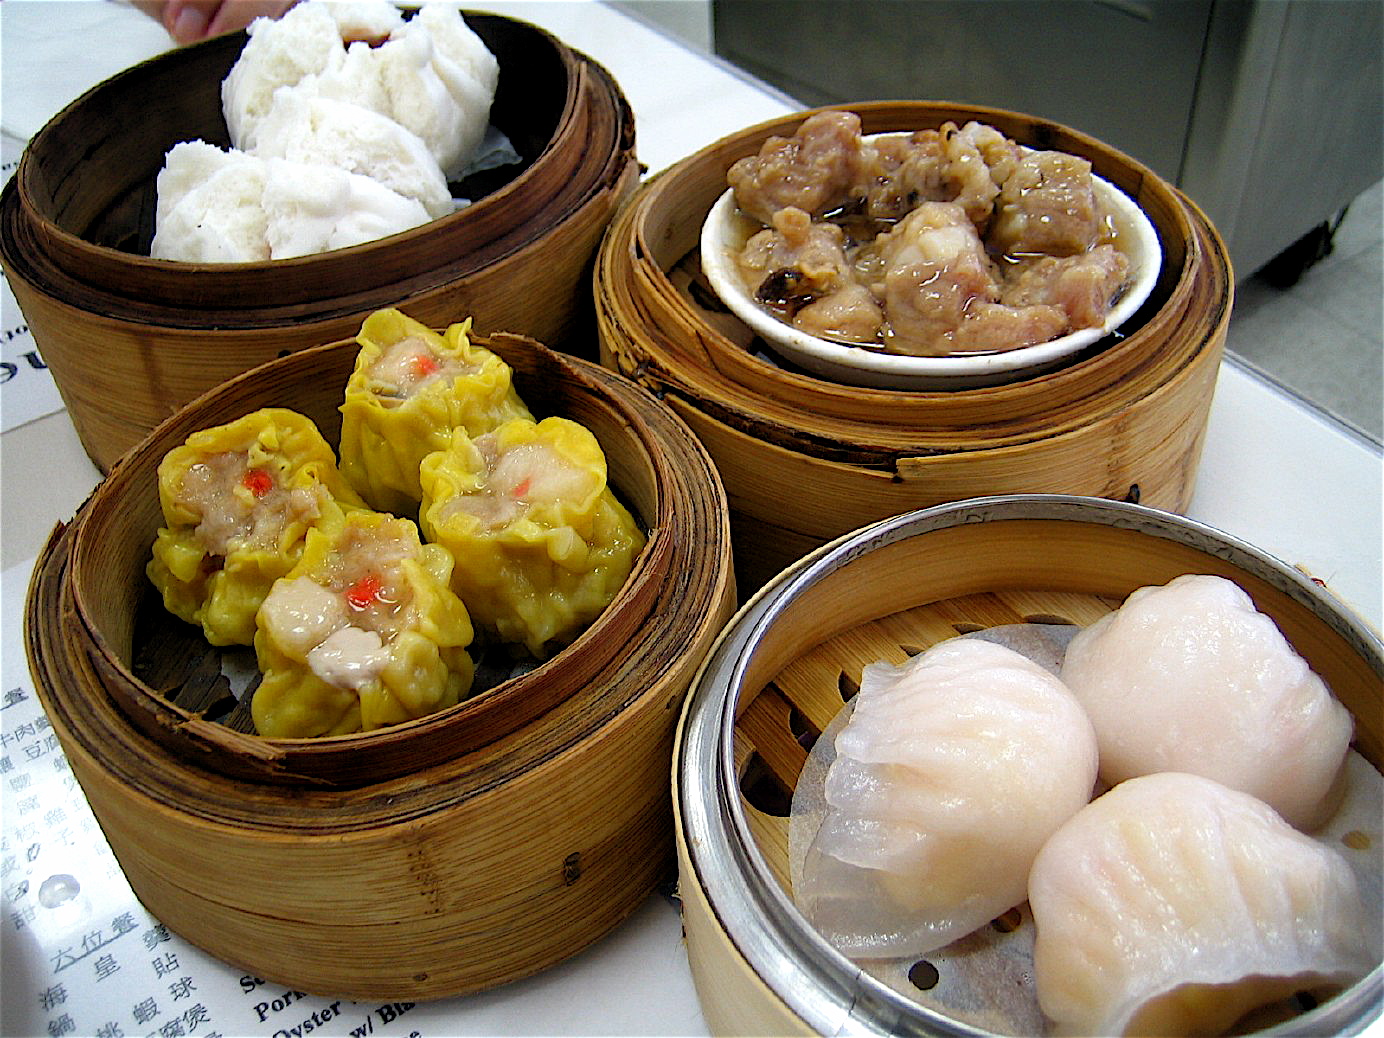 Dim Sum symbolizes election-fuelled language anxieties - Forget The Box